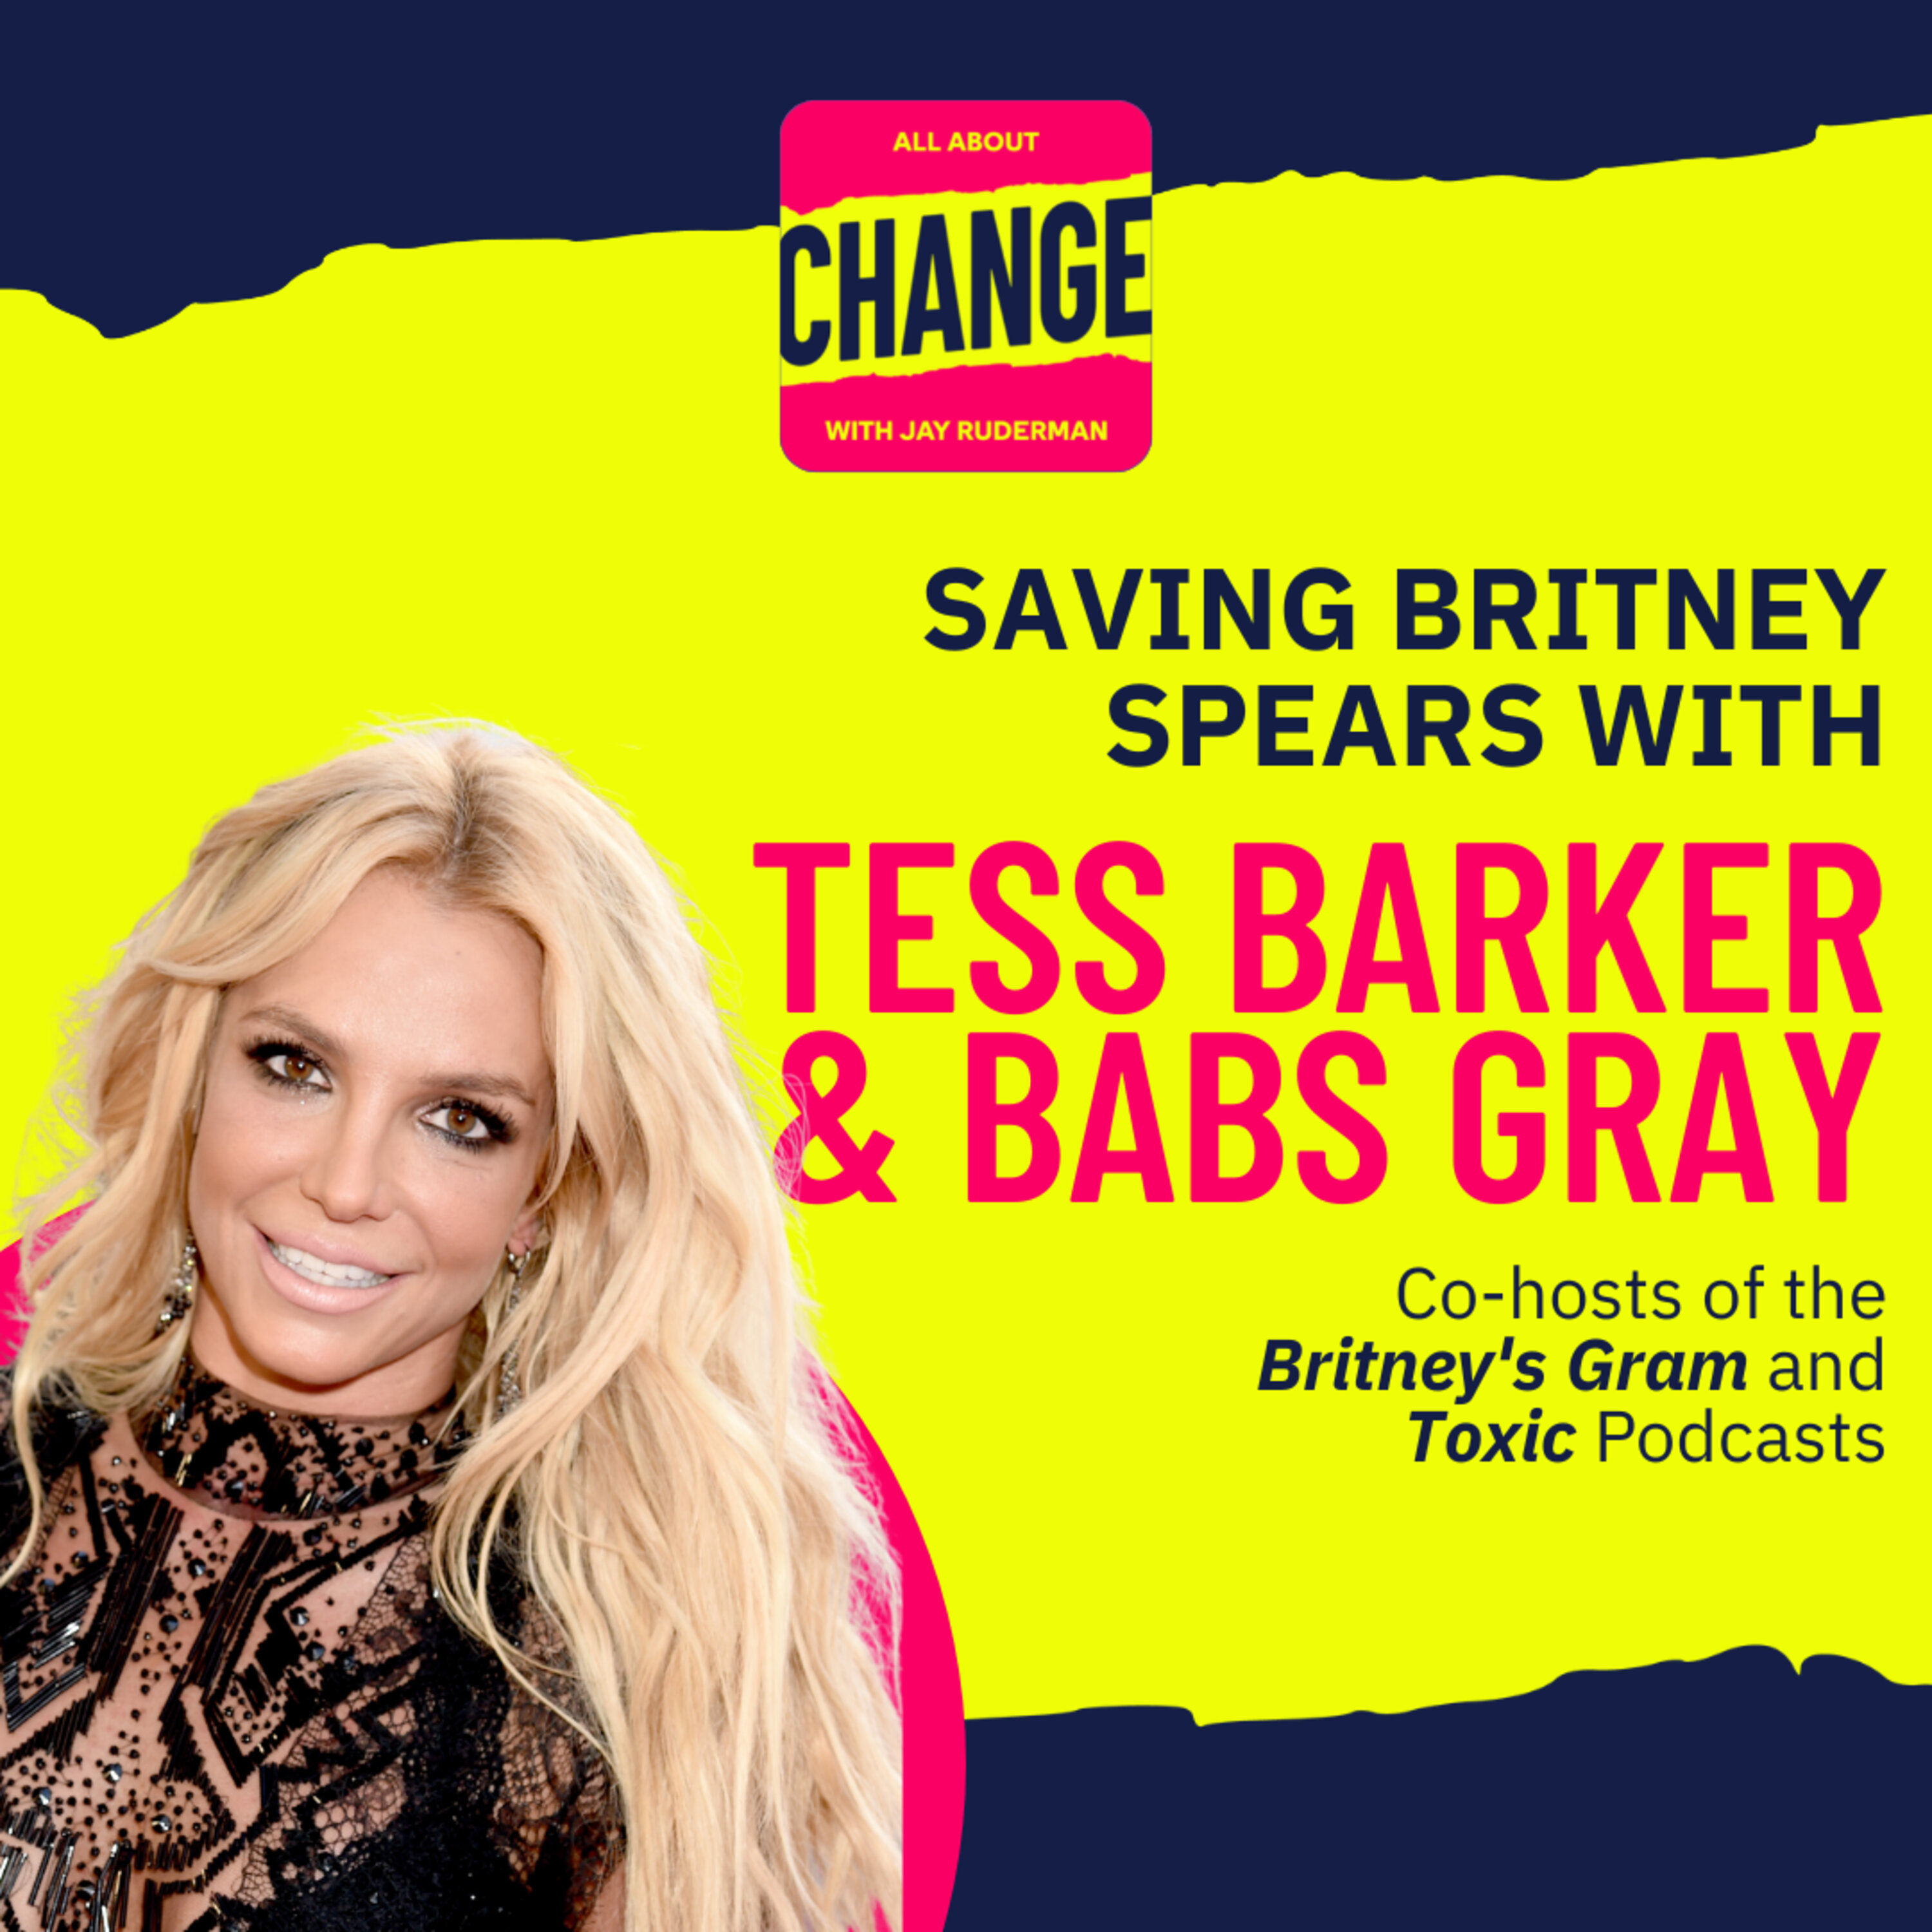 Saving Britney Spears - Tess Barker and Babs Gray, Co-hosts of the Britney's Gram and Toxic Podcasts